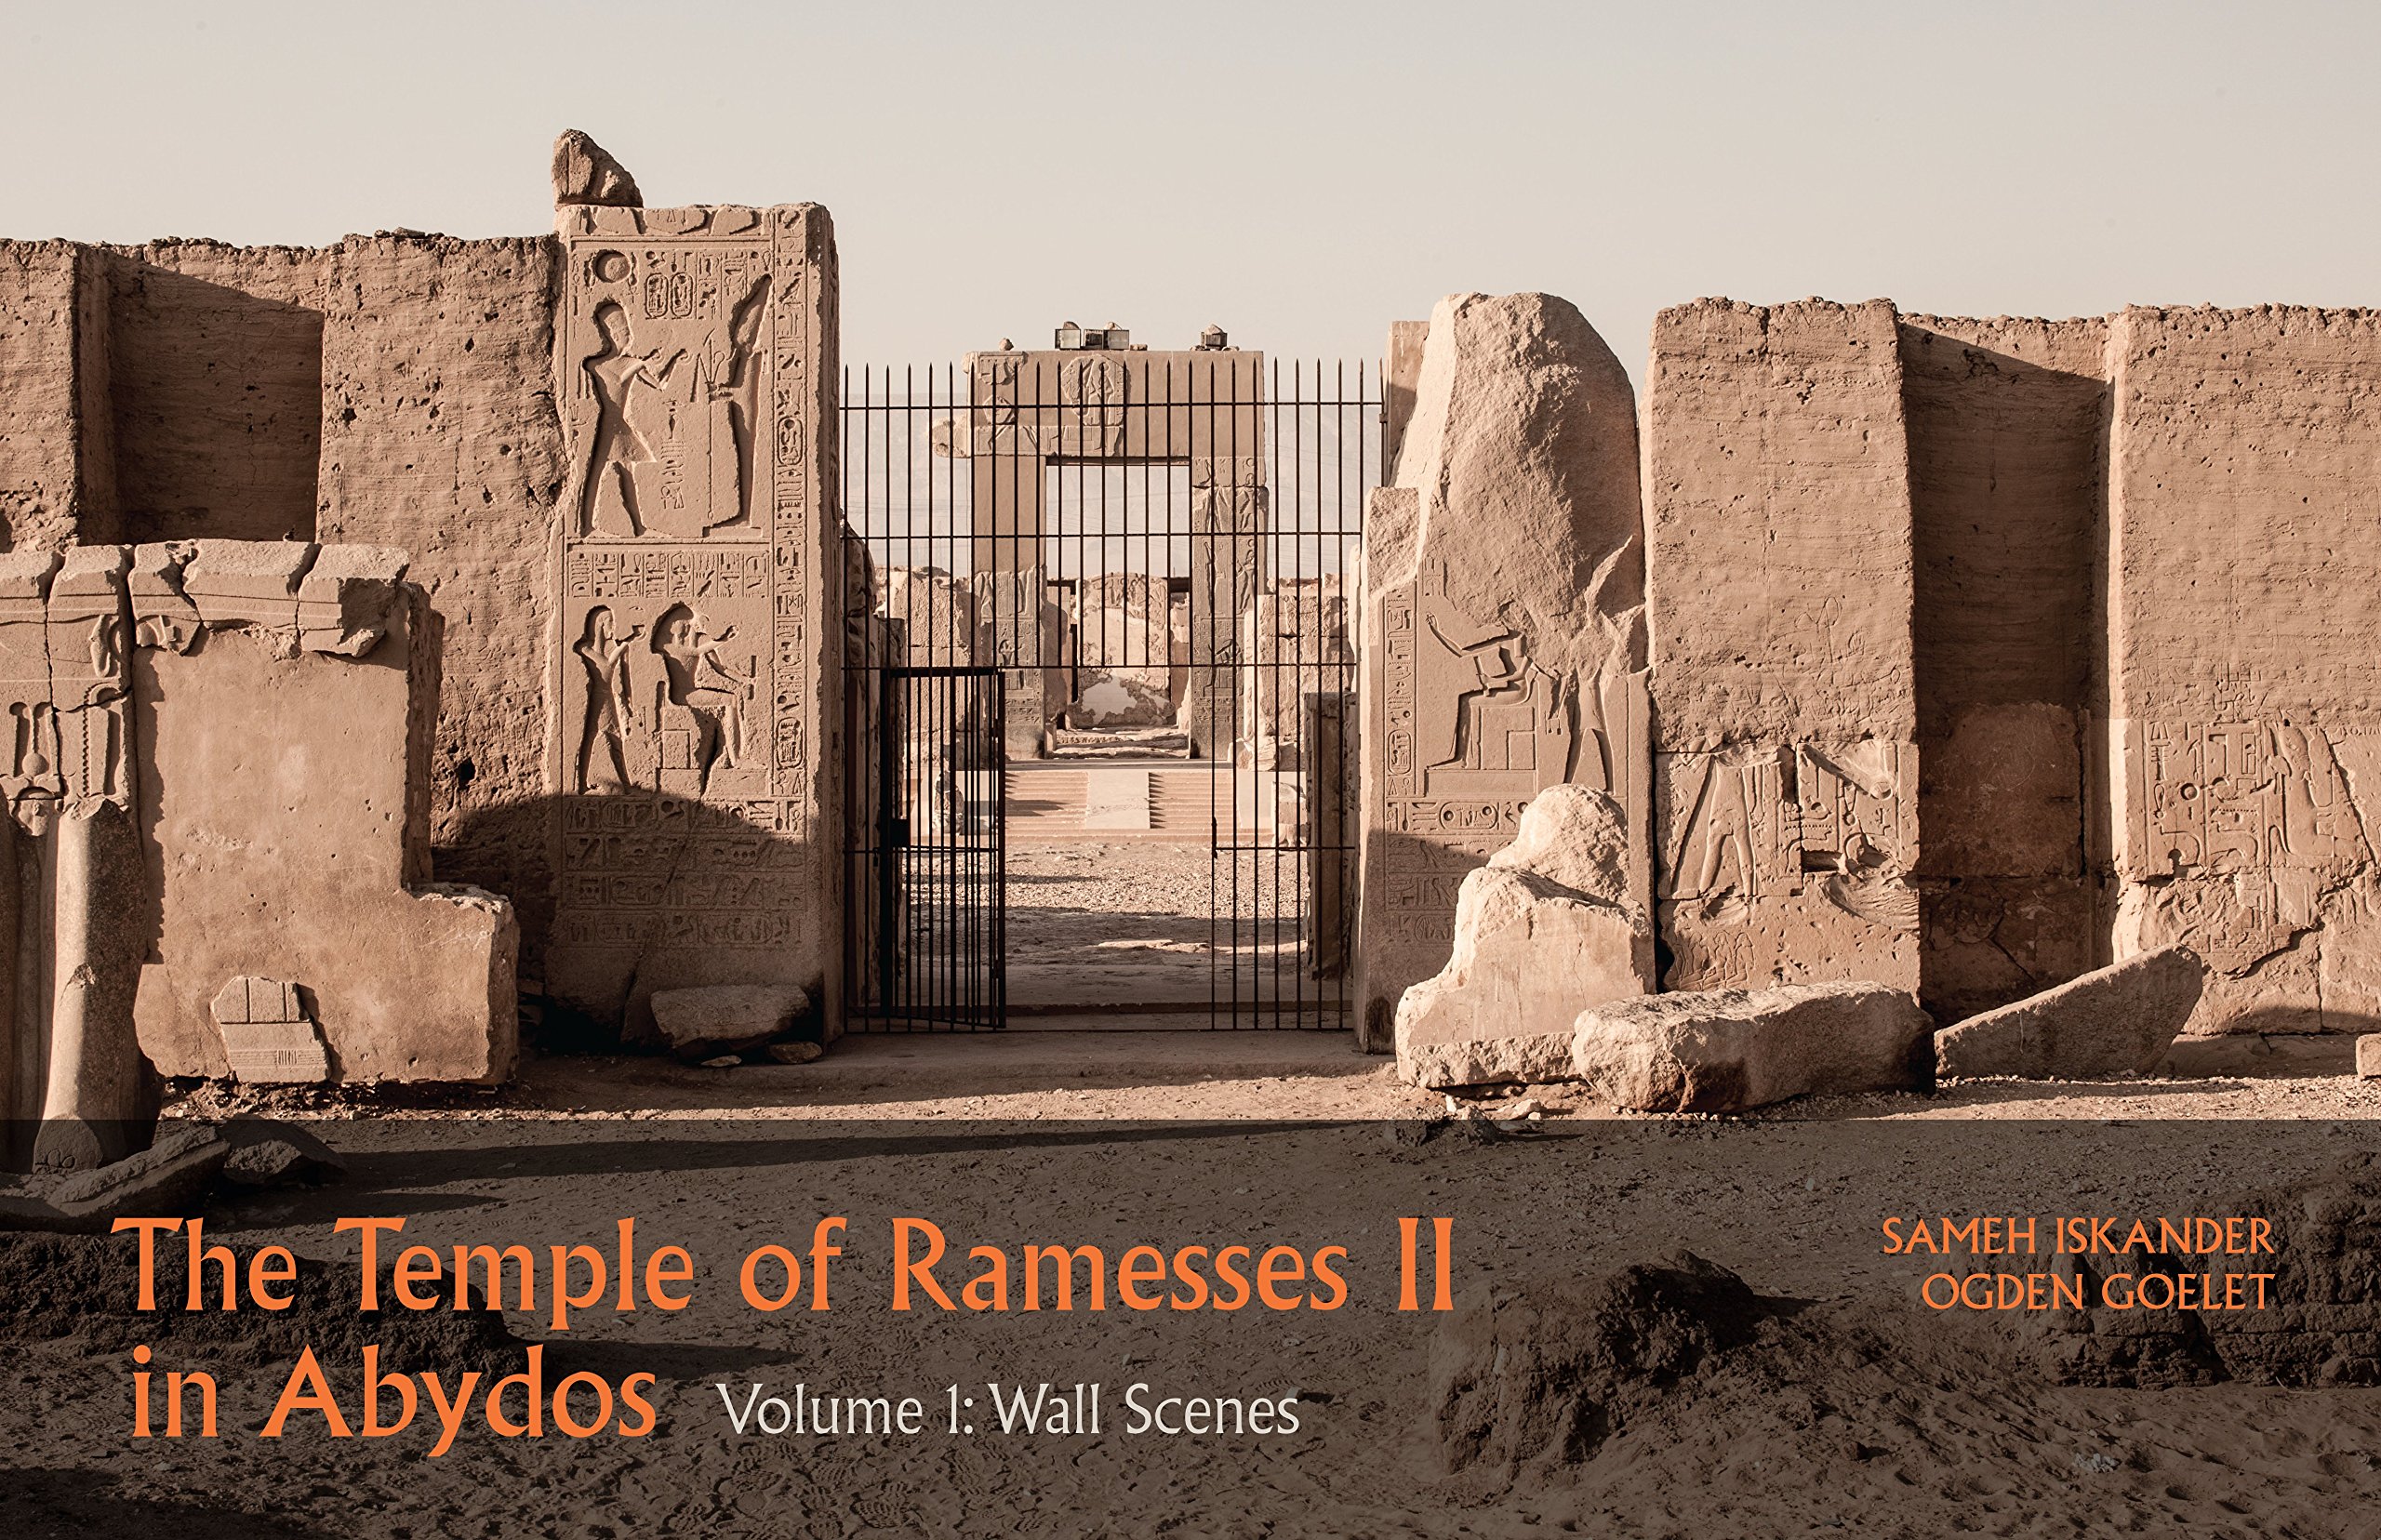 Now Available: “The Temple of Ramesses II in Abydos” by ISAW Researchers